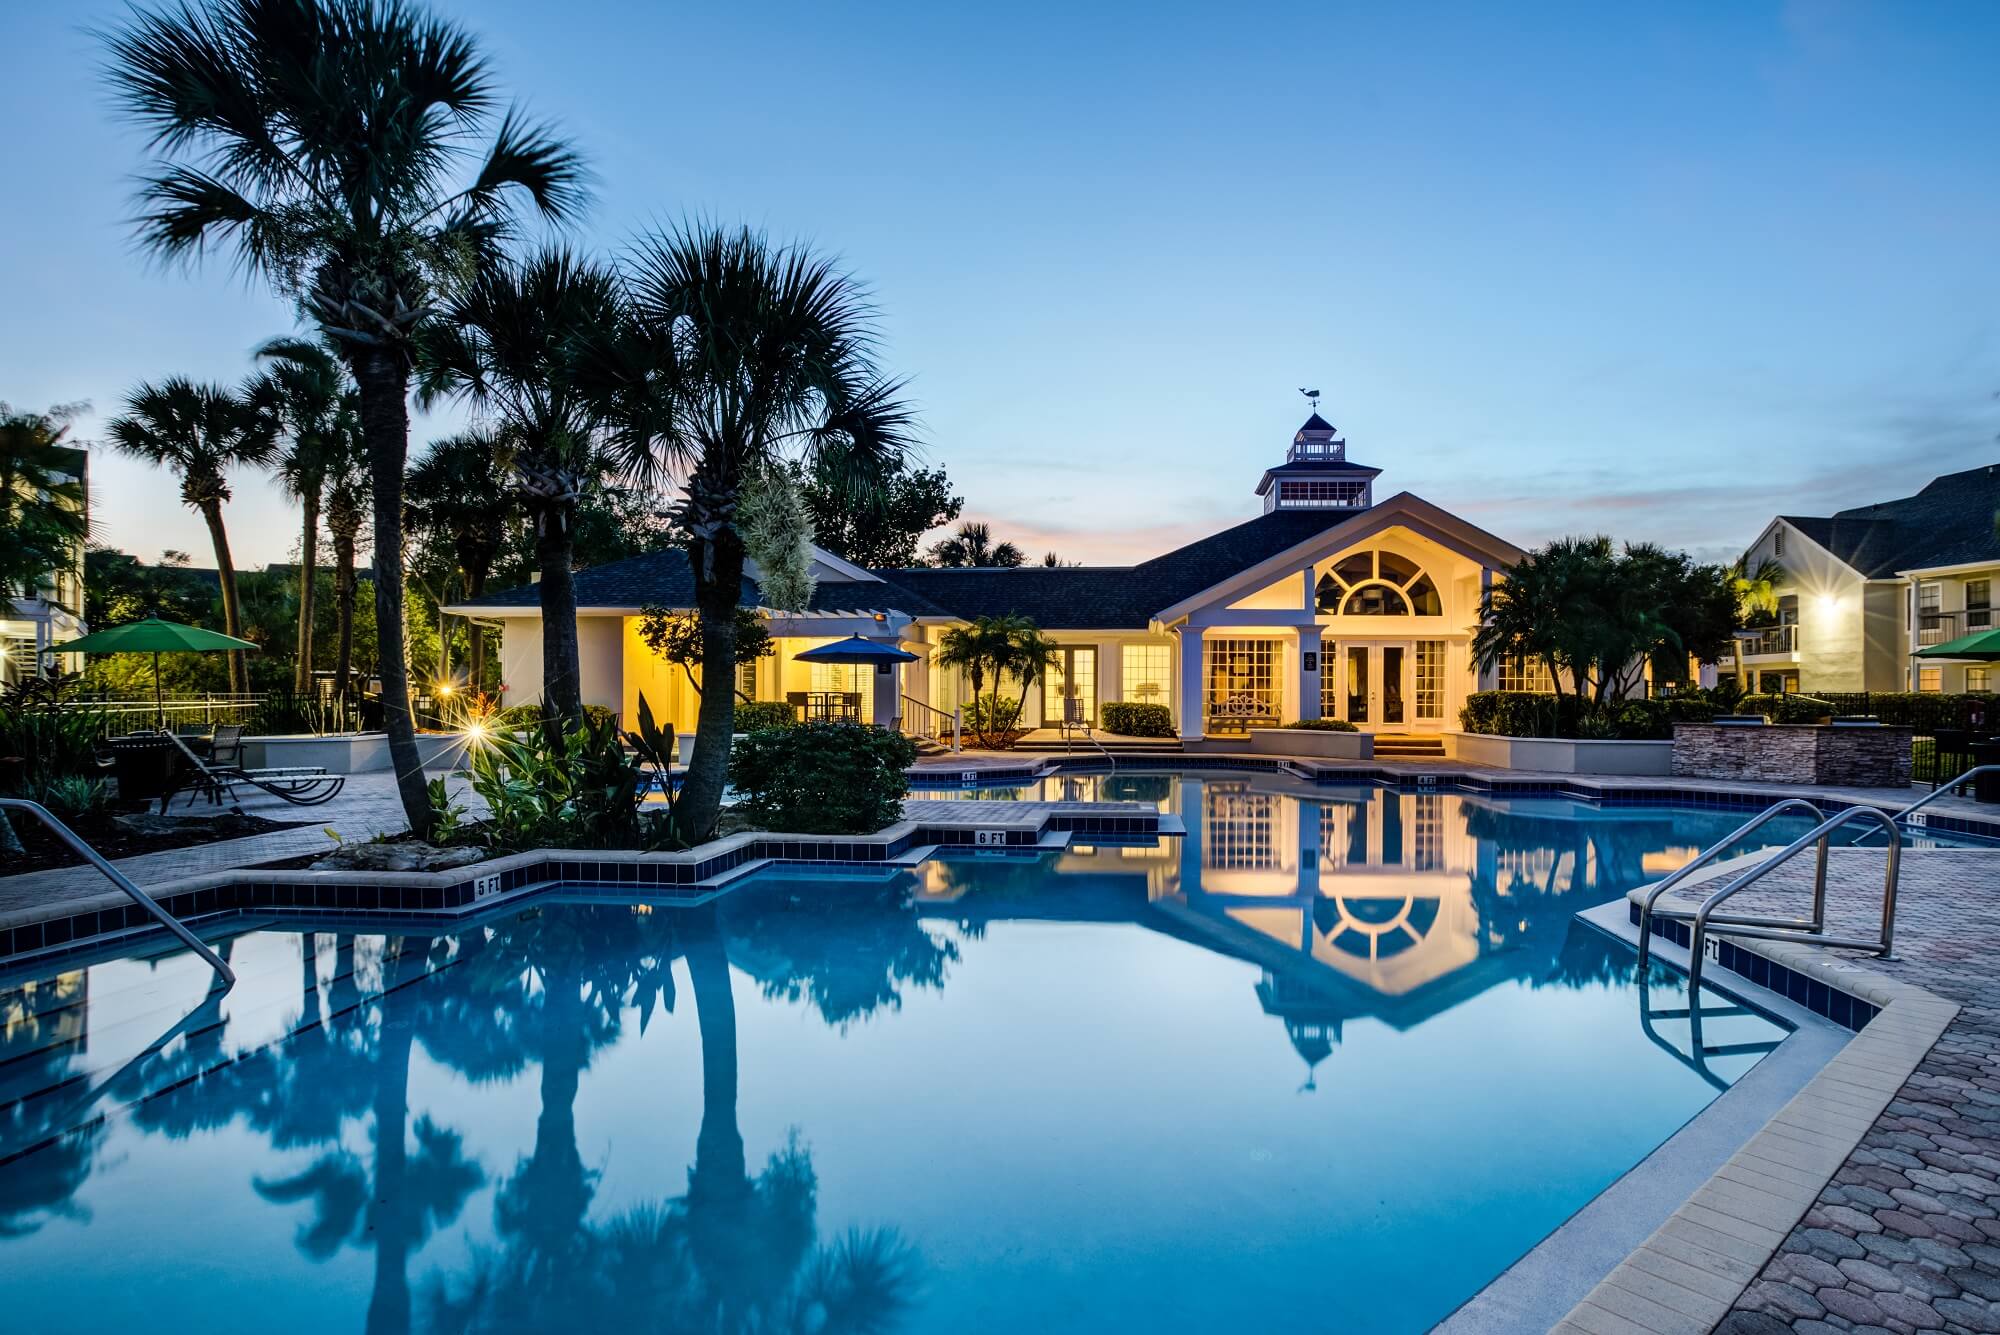 night time pool view with palm trees, lounge chairs, and view of clubhouse.